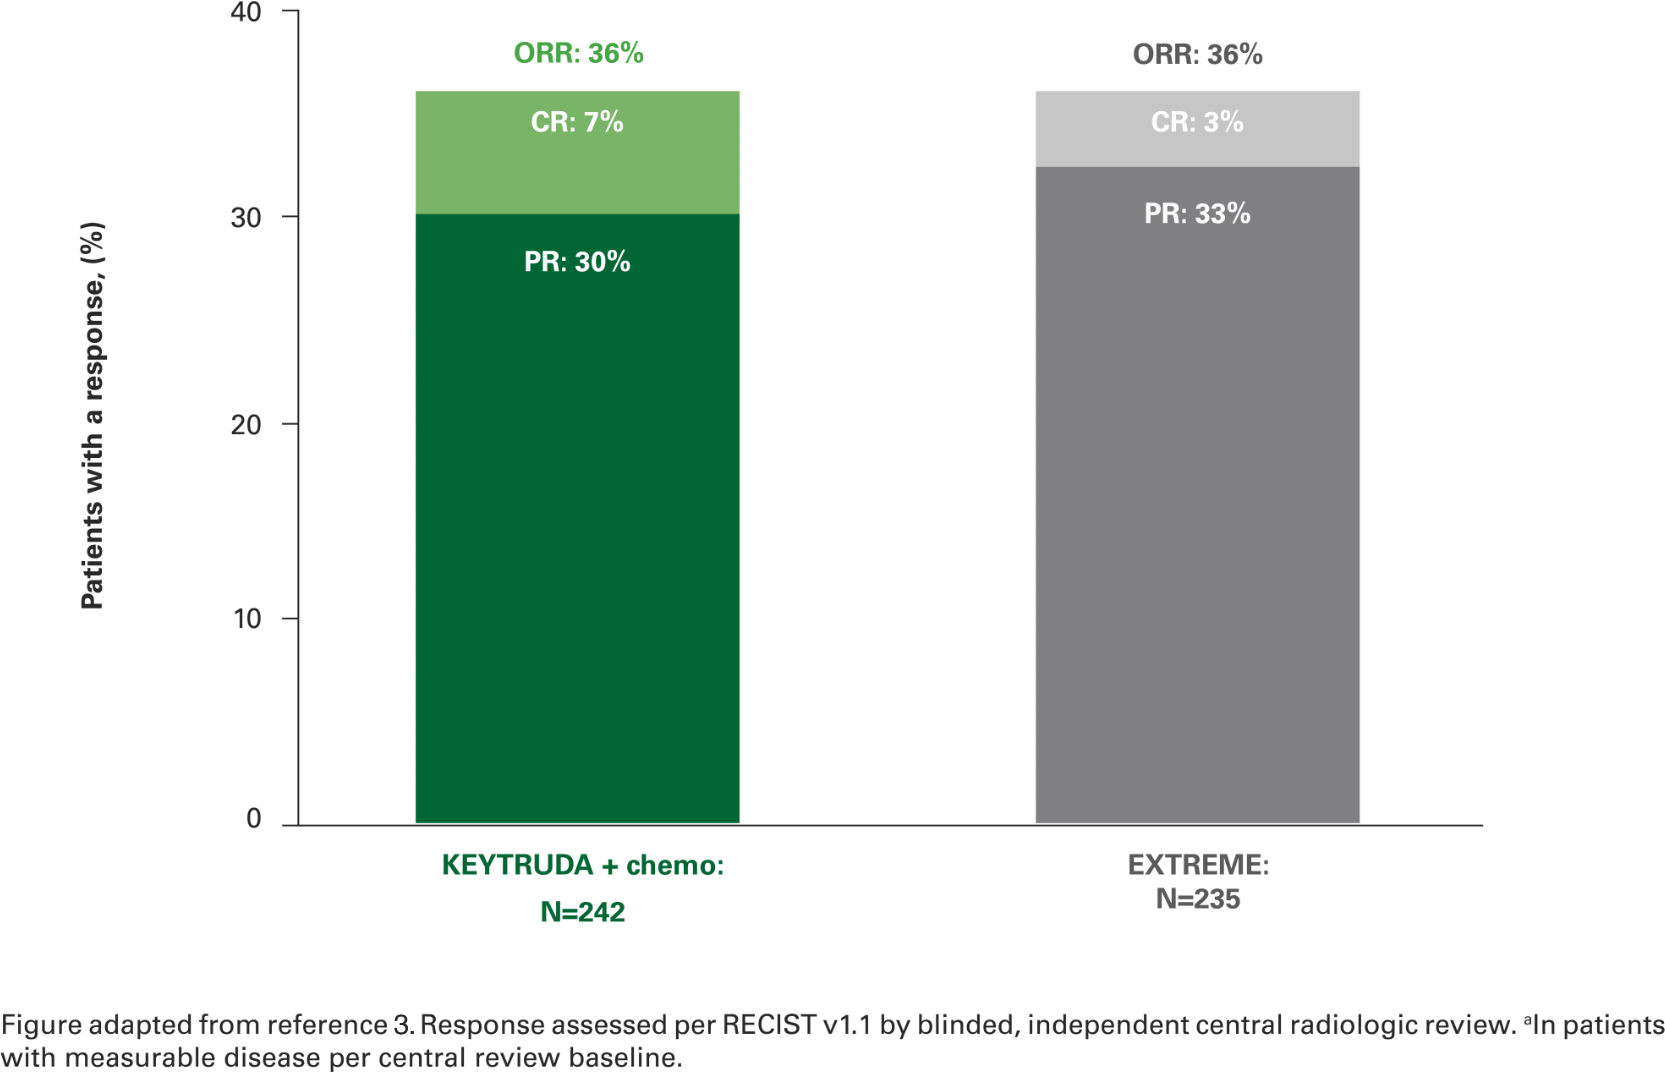 Bar chart of overall response rates for HNSCC patients in KEYNOTE 048 for KEYTRUDA (pembrolizumab) plus chemotherapy and EXTREME, including complete response rates and partial response rates